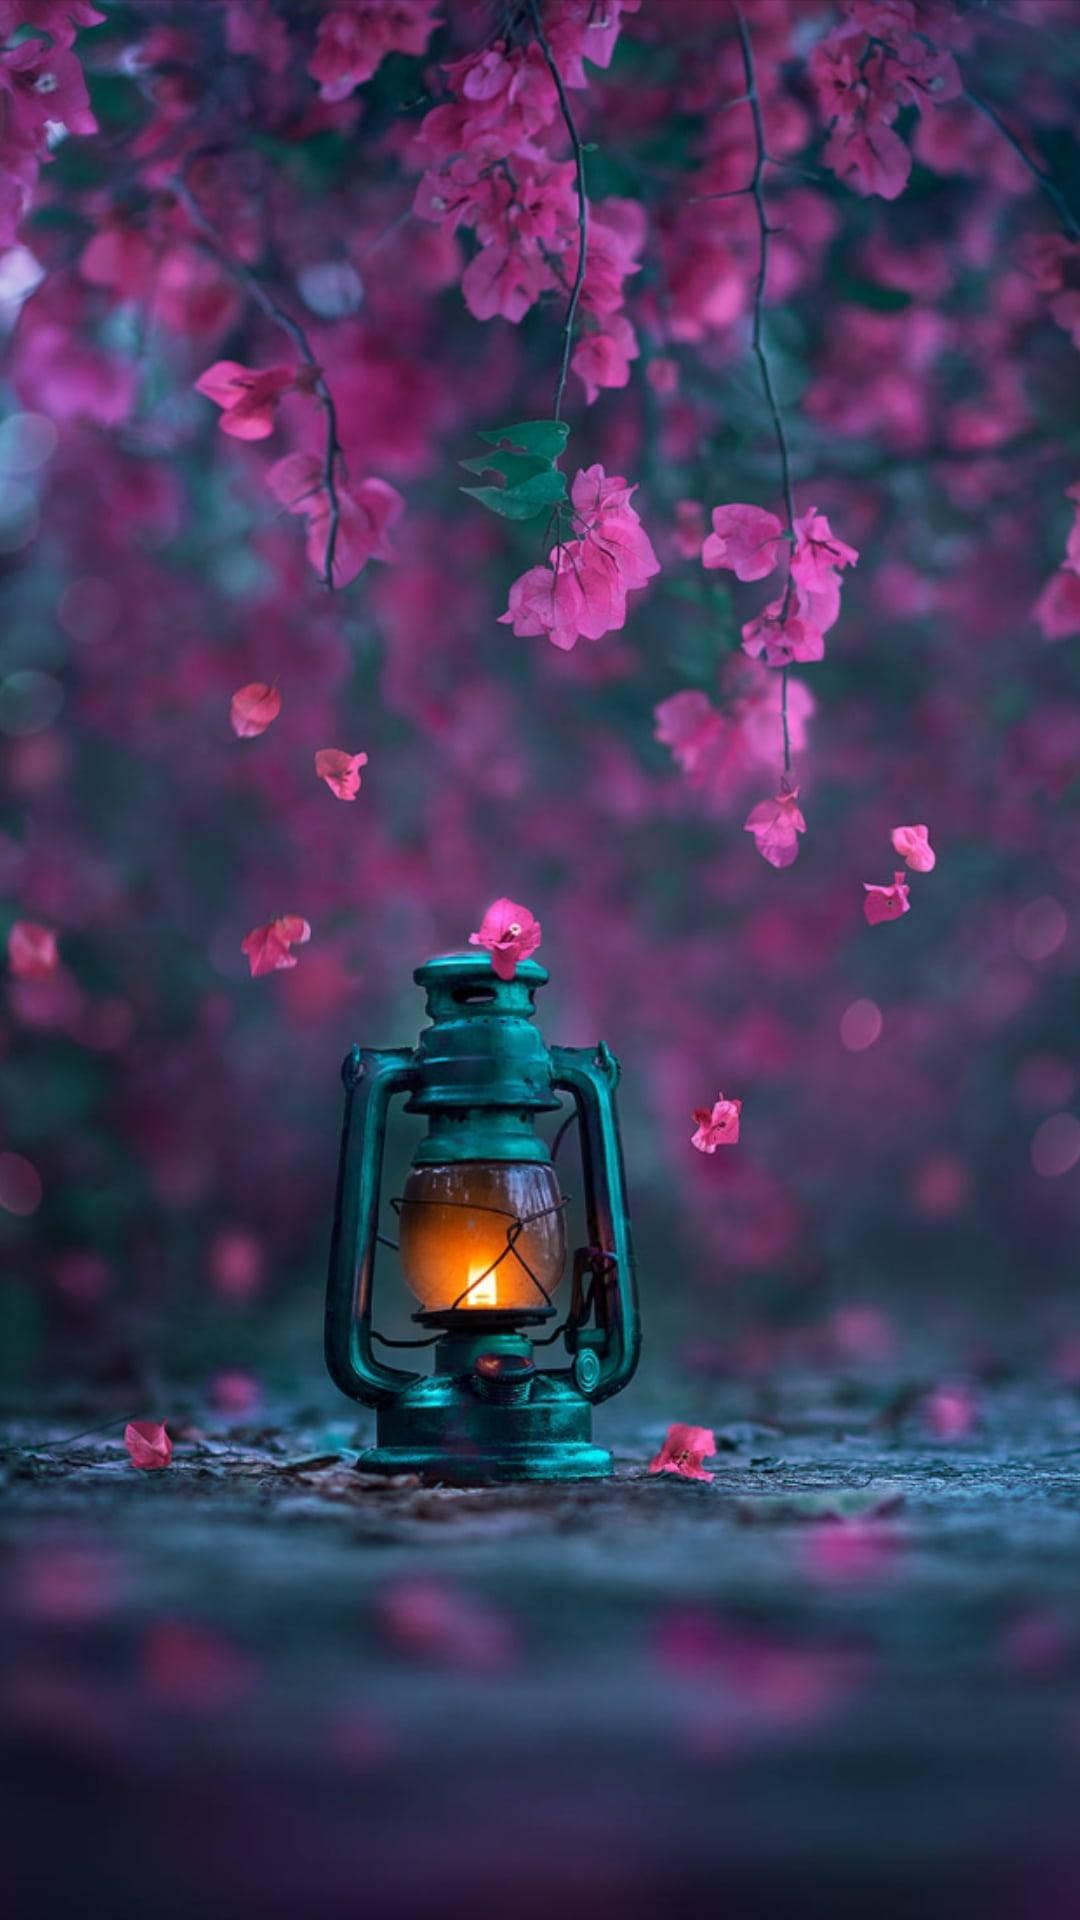 Download Lamp And Flower Mobile Wallpaper 